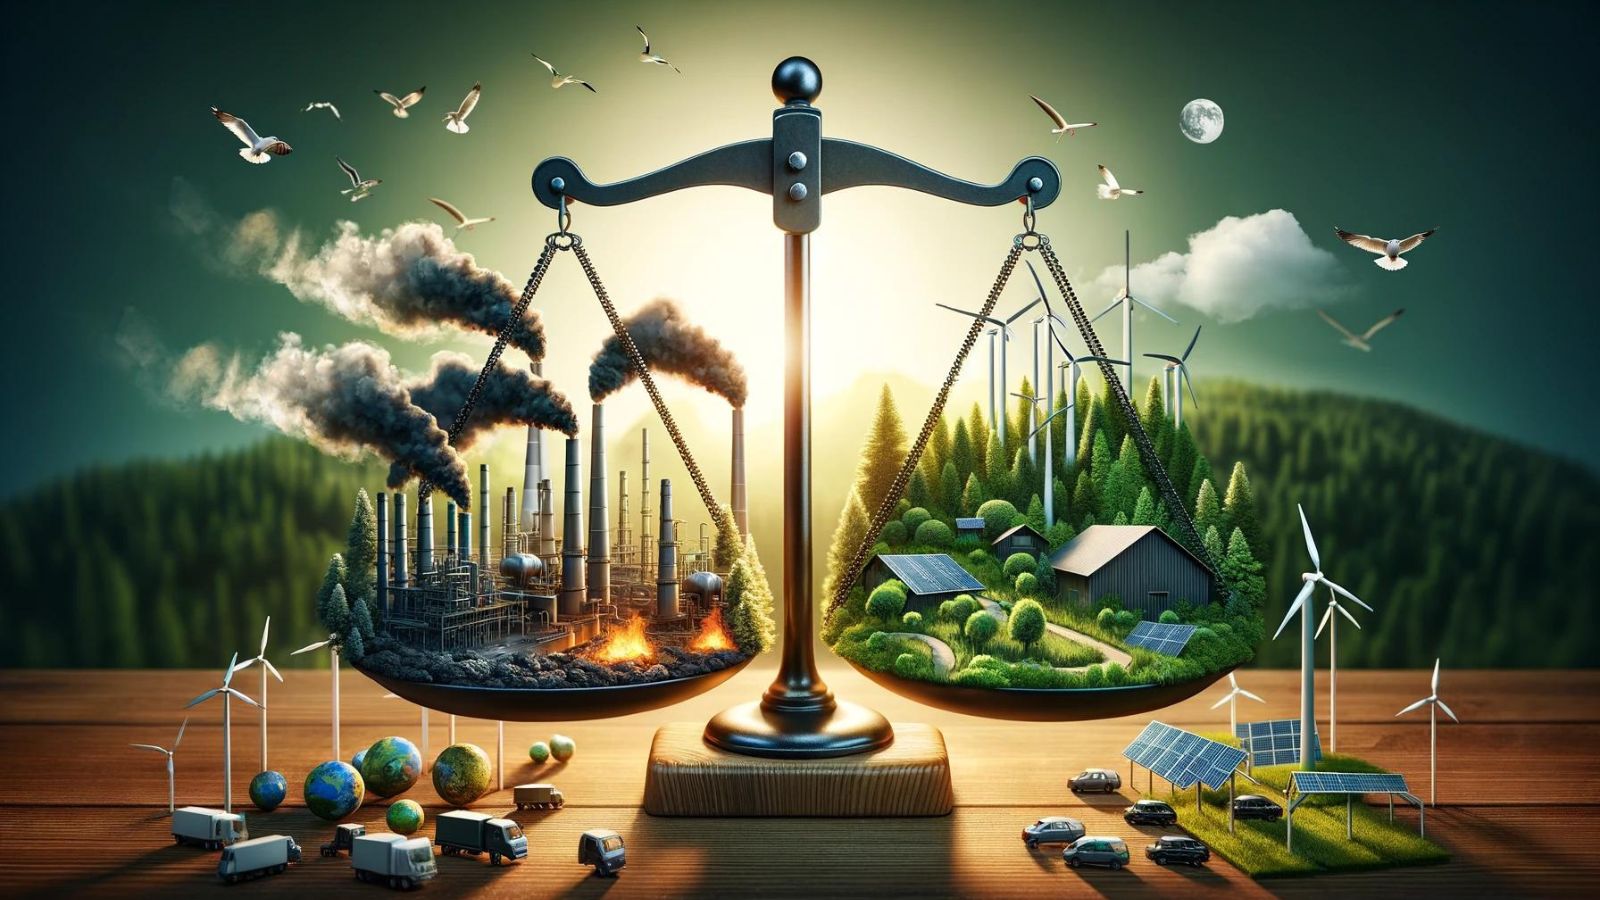 Image symbolising the concept of carbon offsetting, featuring a balanced scale that visually depicts the effort to balance carbon emissions with compensatory actions. One side shows industrial activities emitting smoke, while the other features a lush forest alongside wind turbines and solar panels, conveying the investment in environmental projects to achieve net-zero emissions and highlight the significance of sustainable practices in combating climate change.